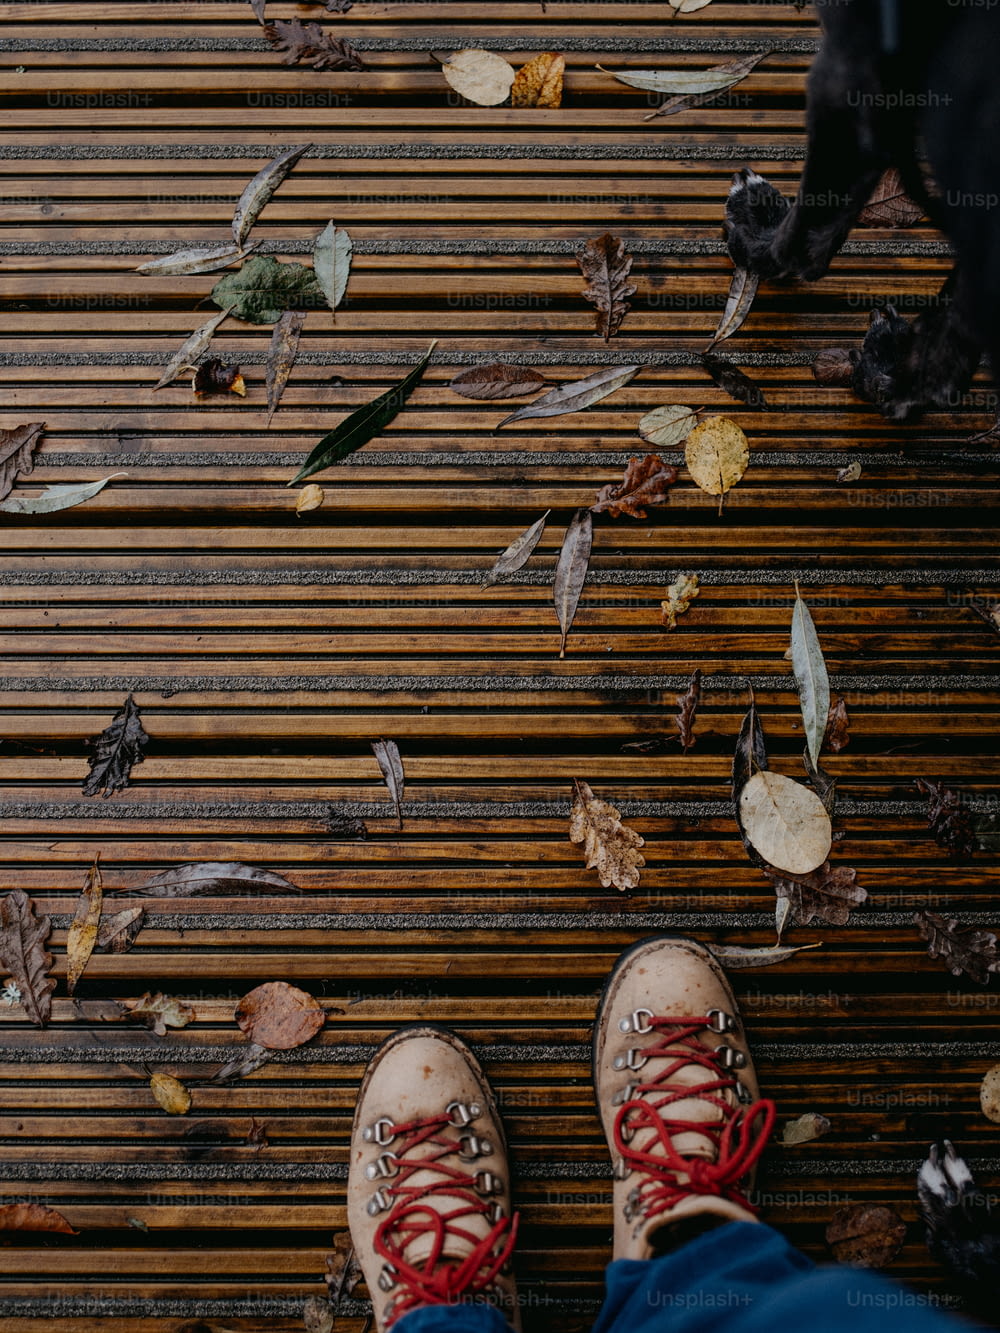 a pair of feet standing on a wooden floor covered in leaves